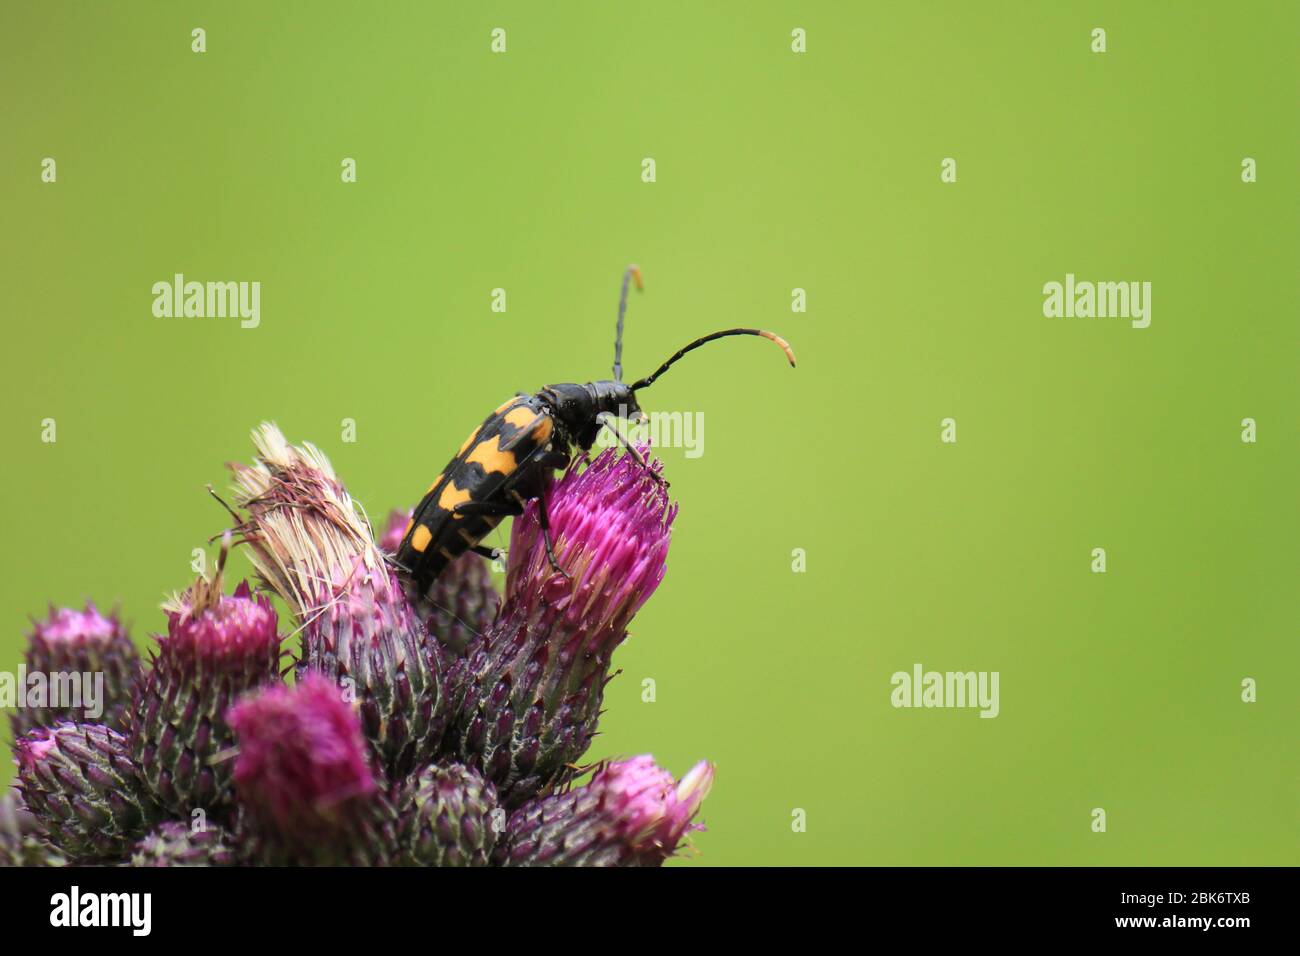 Beautiful closeup of a Bee beetle on a thistle flower with green blurred background Stock Photo